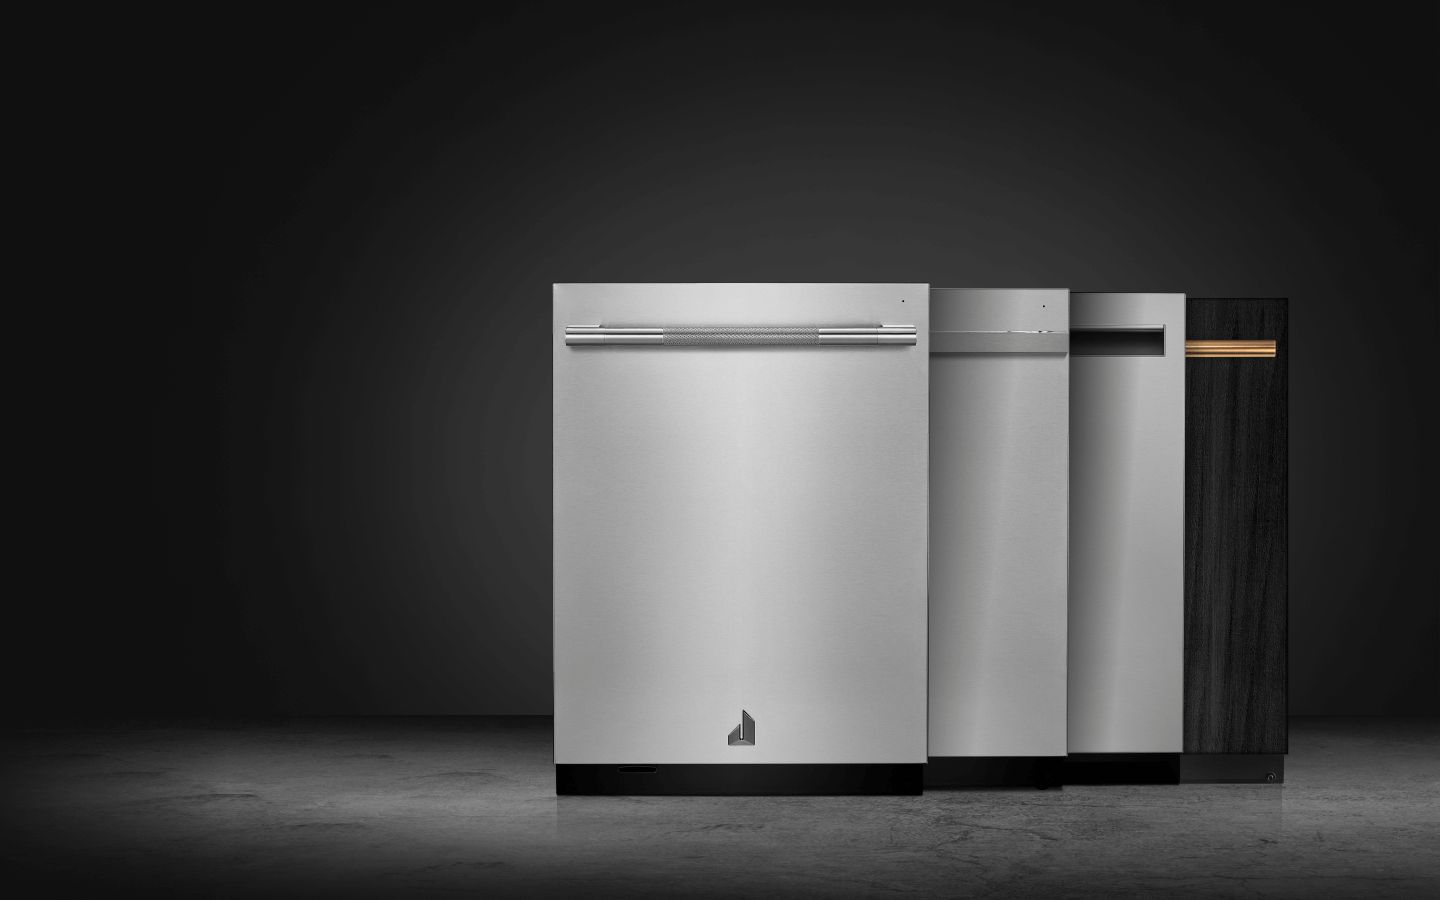 Four JennAir® Dishwashers in different styles.